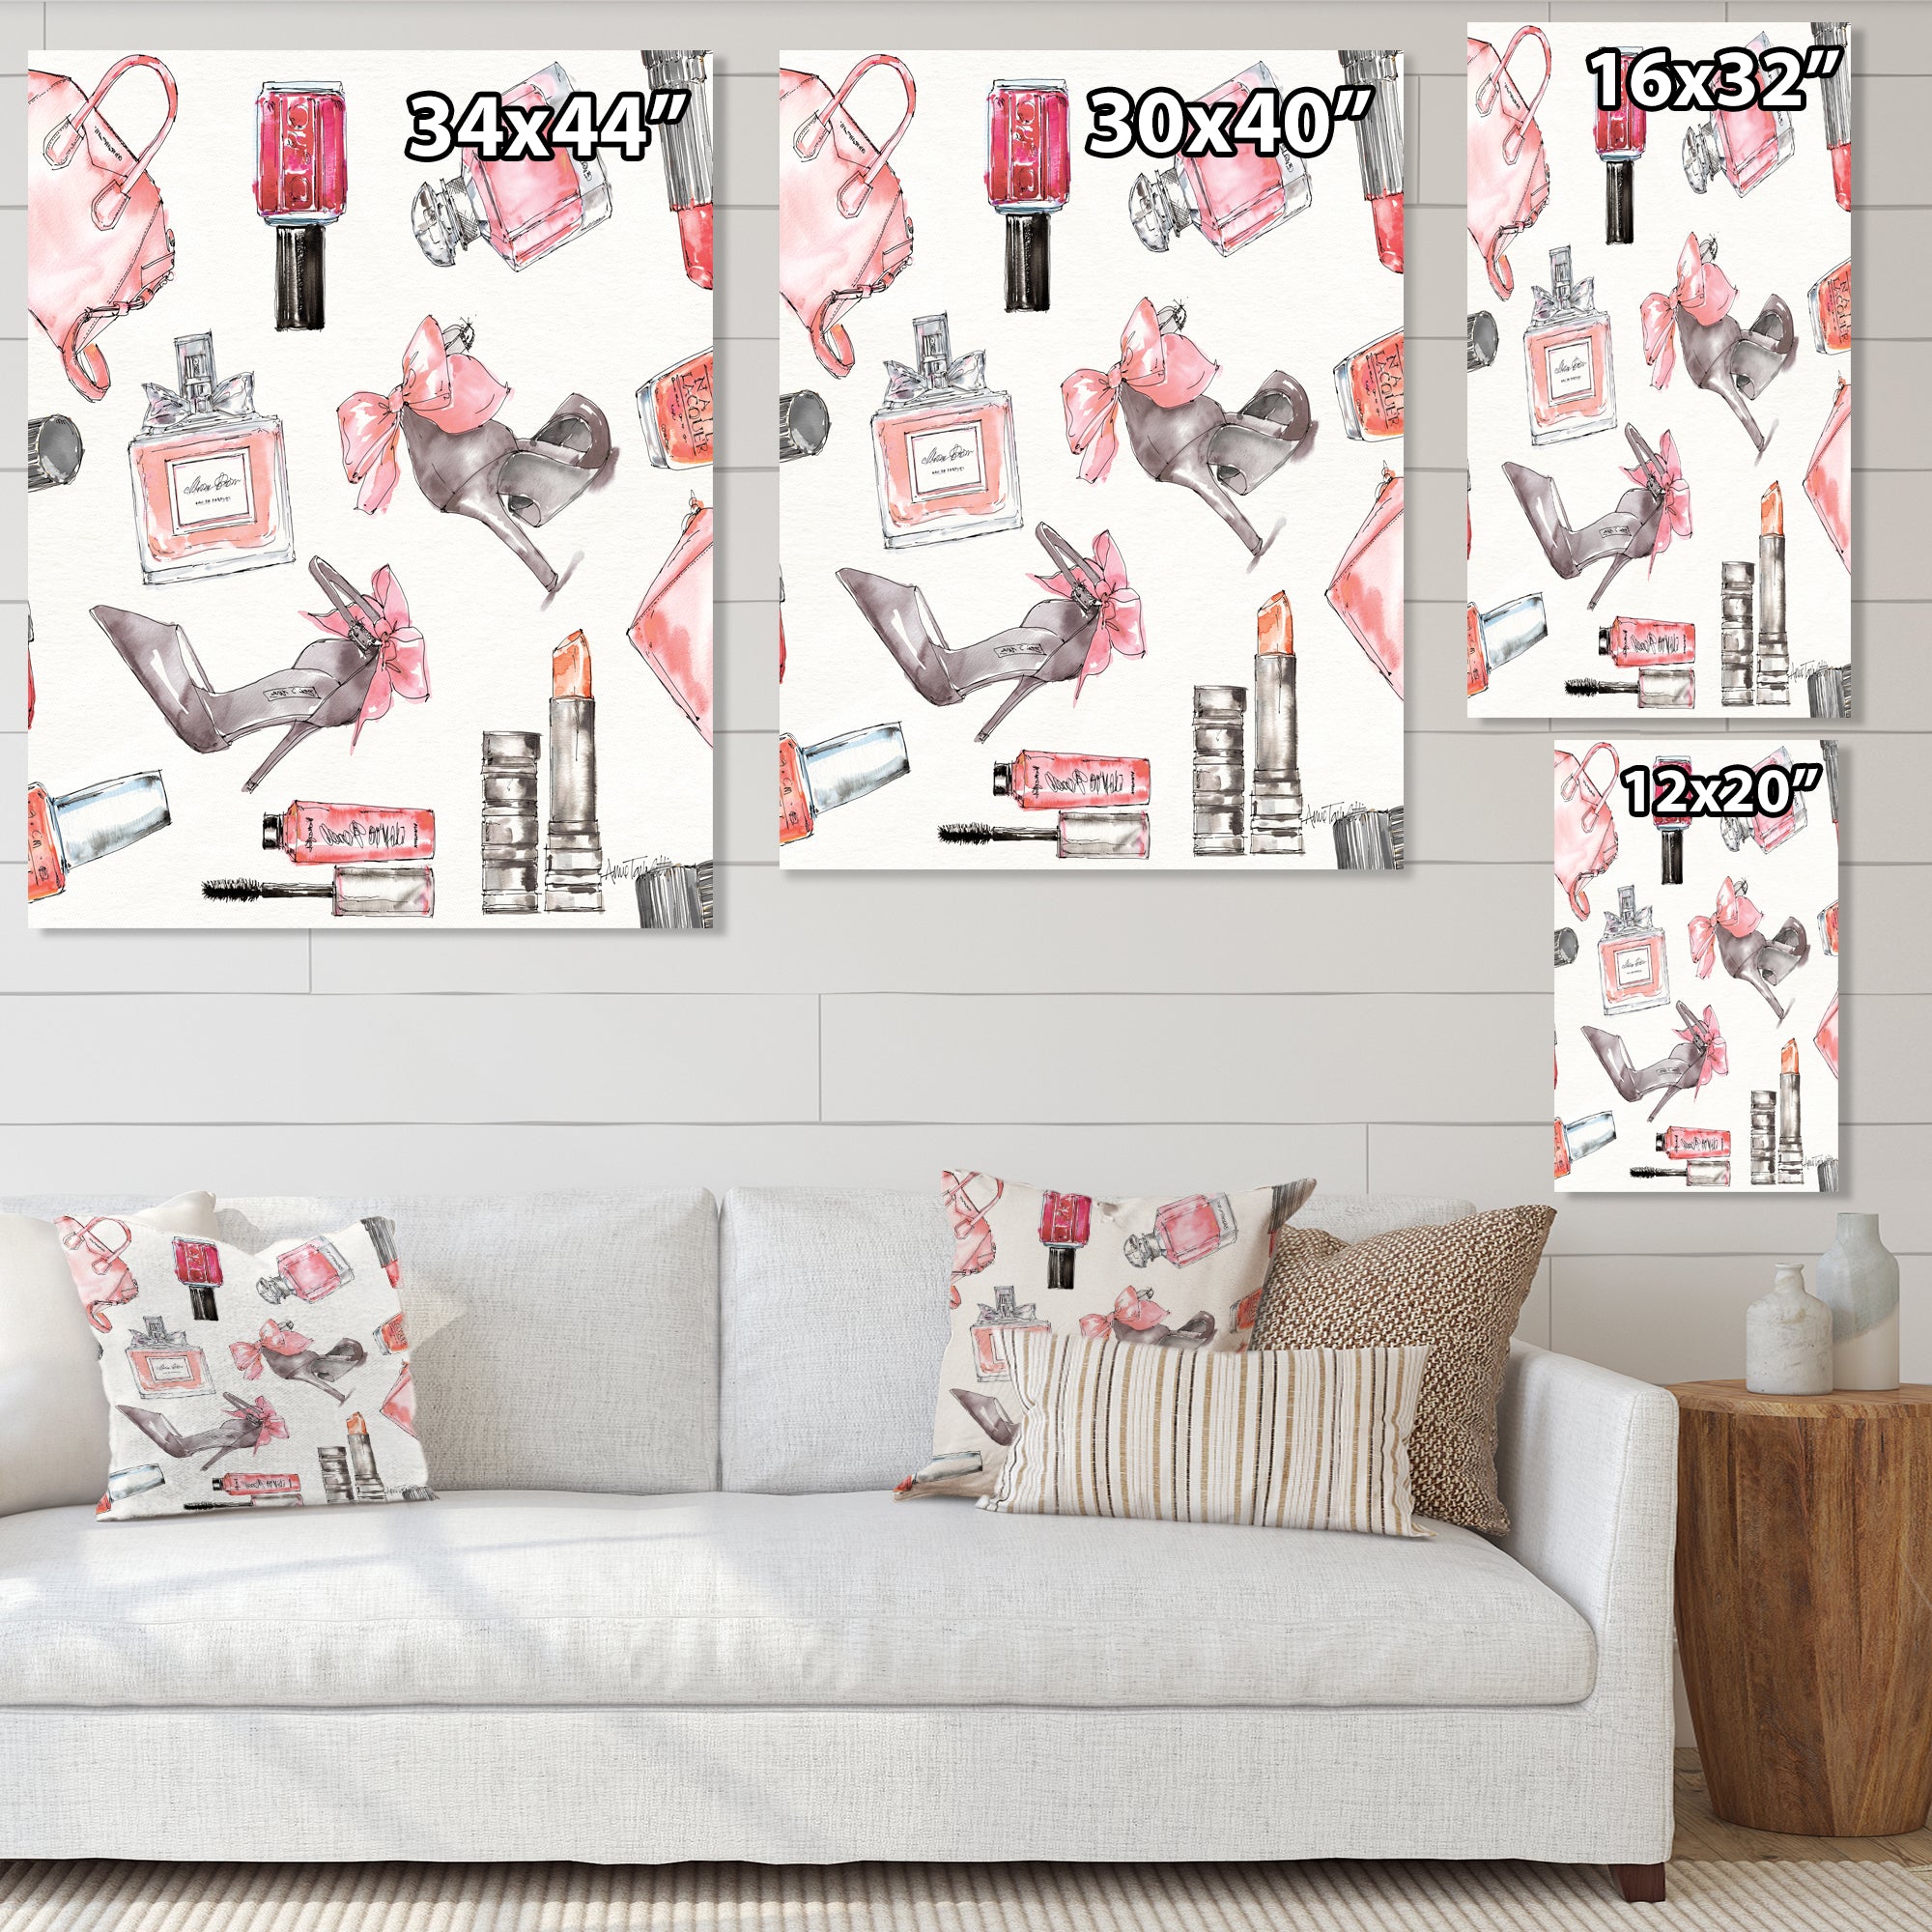 Glam Chic Accents Pattern I